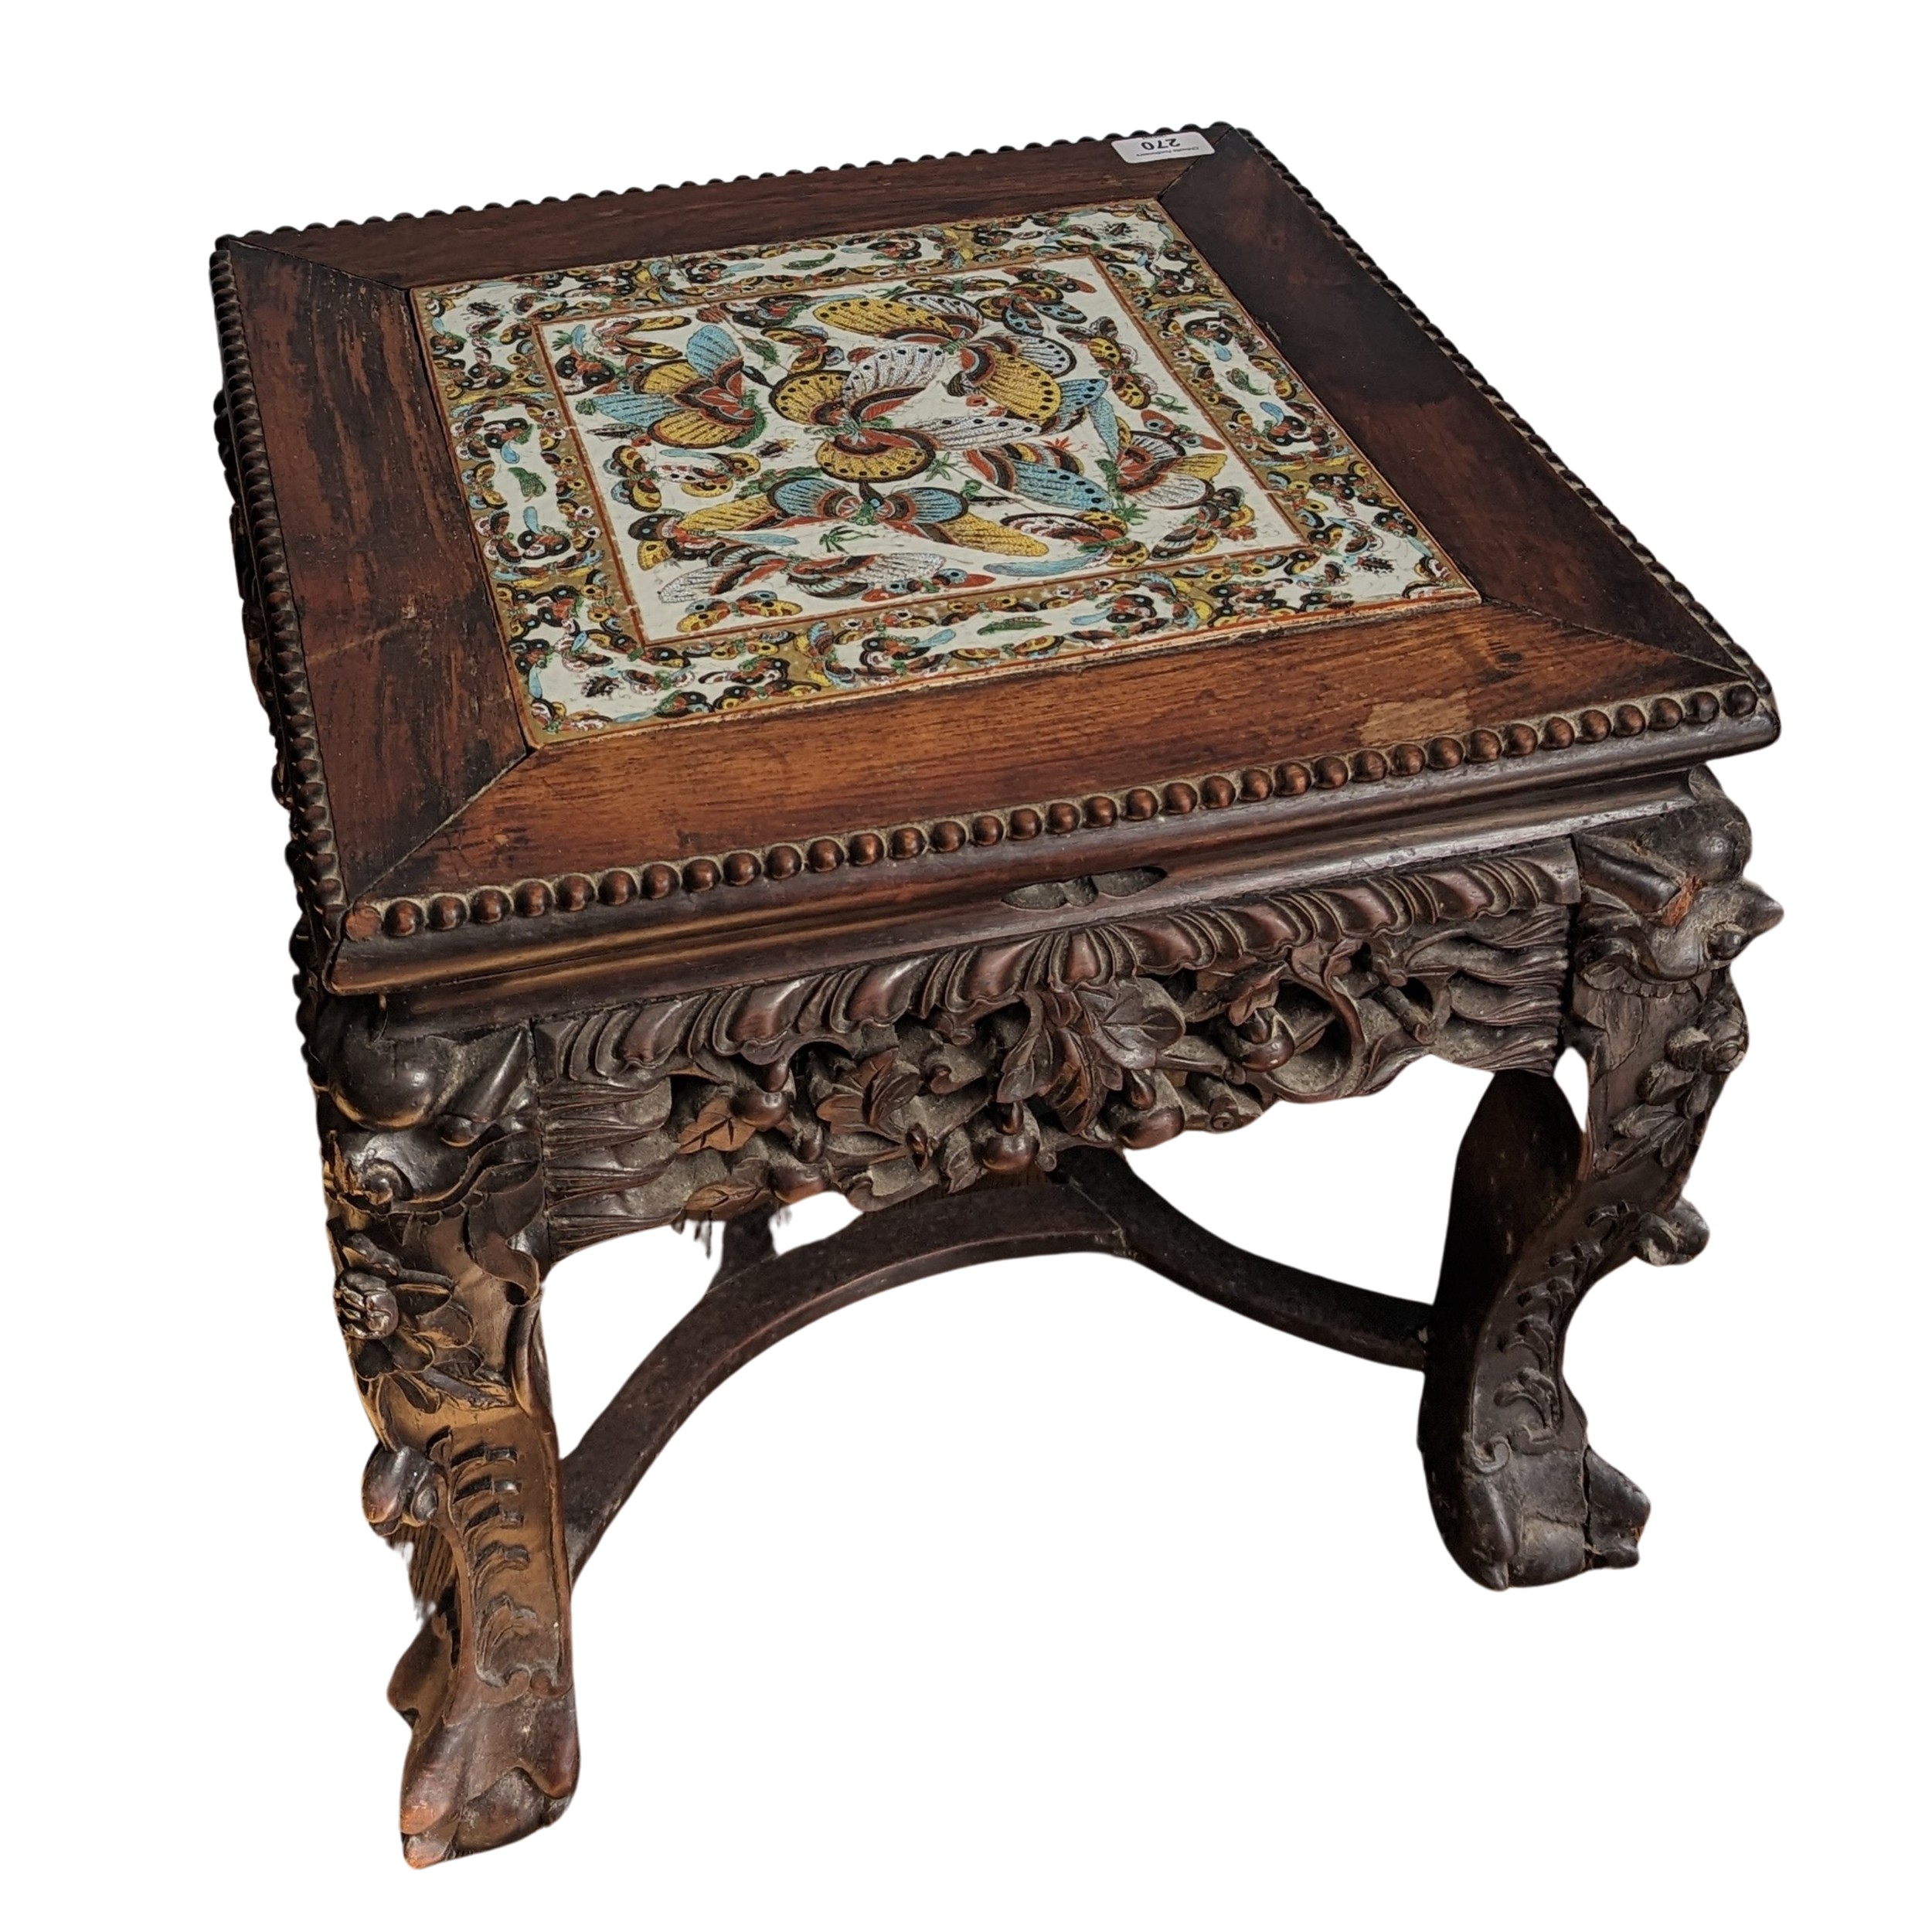 An unusual antique Chinese carved hardwood tile top side Table / Plant Stand, square top inset